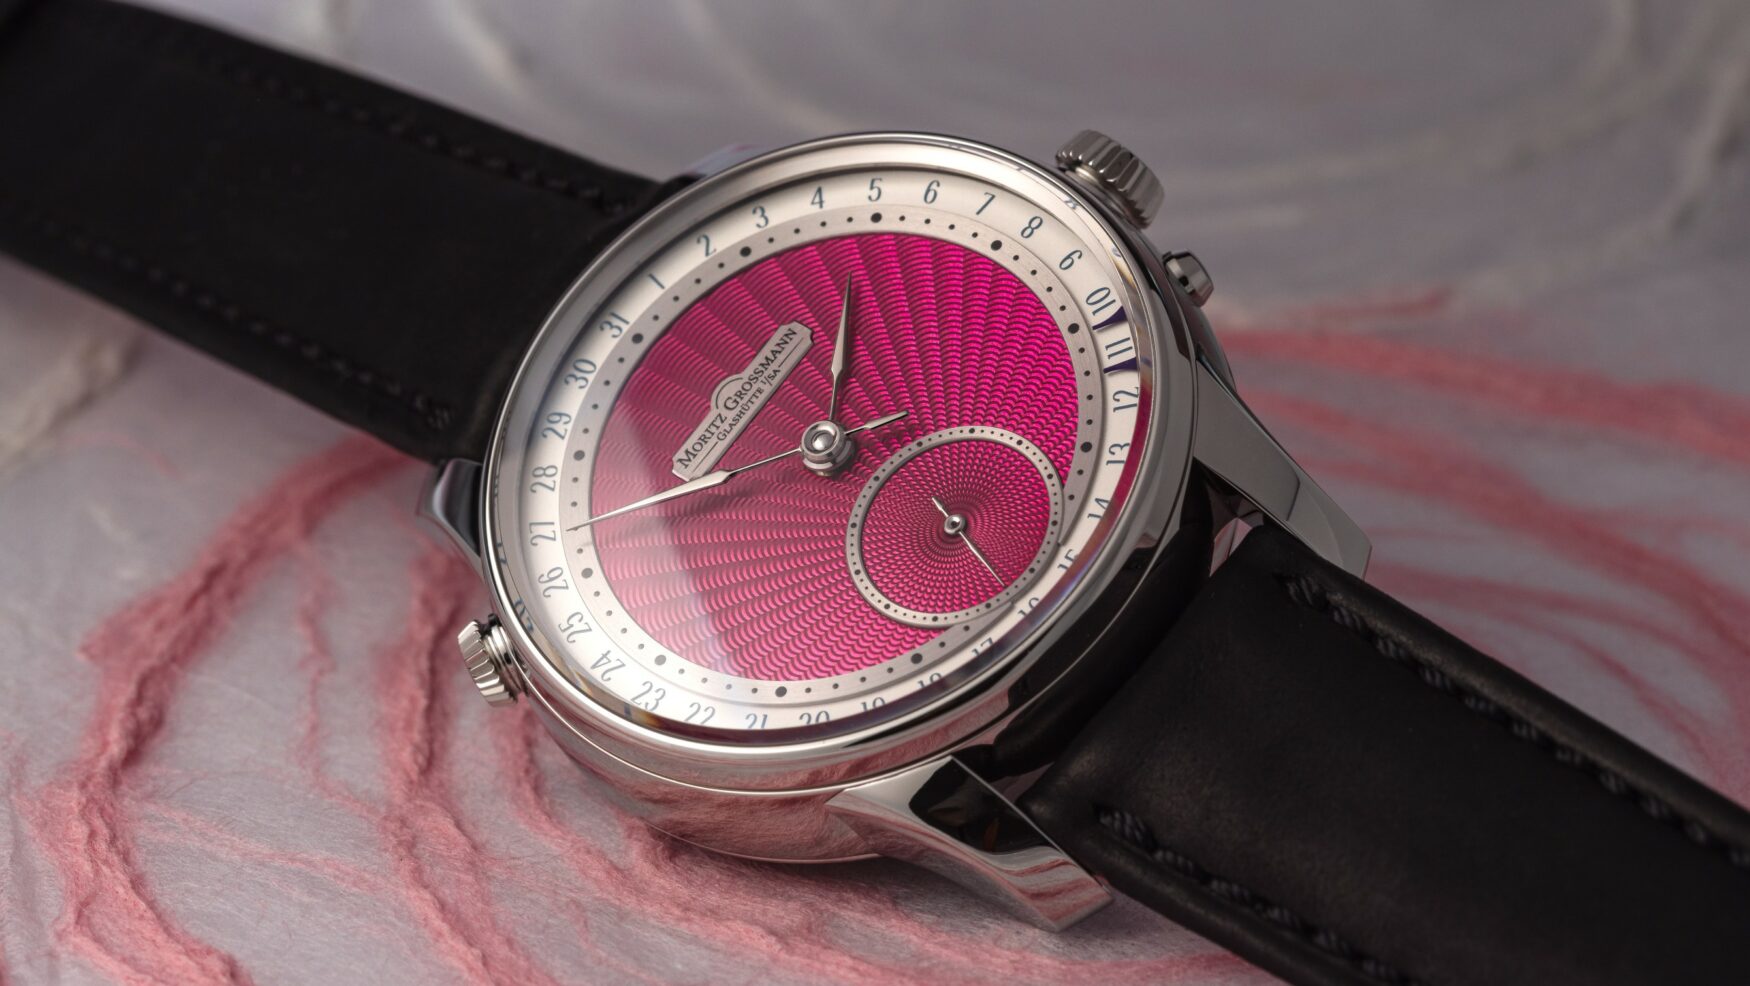 Moritz Grossmann and Art in Time team up to benefit the Princess Grace Foundation